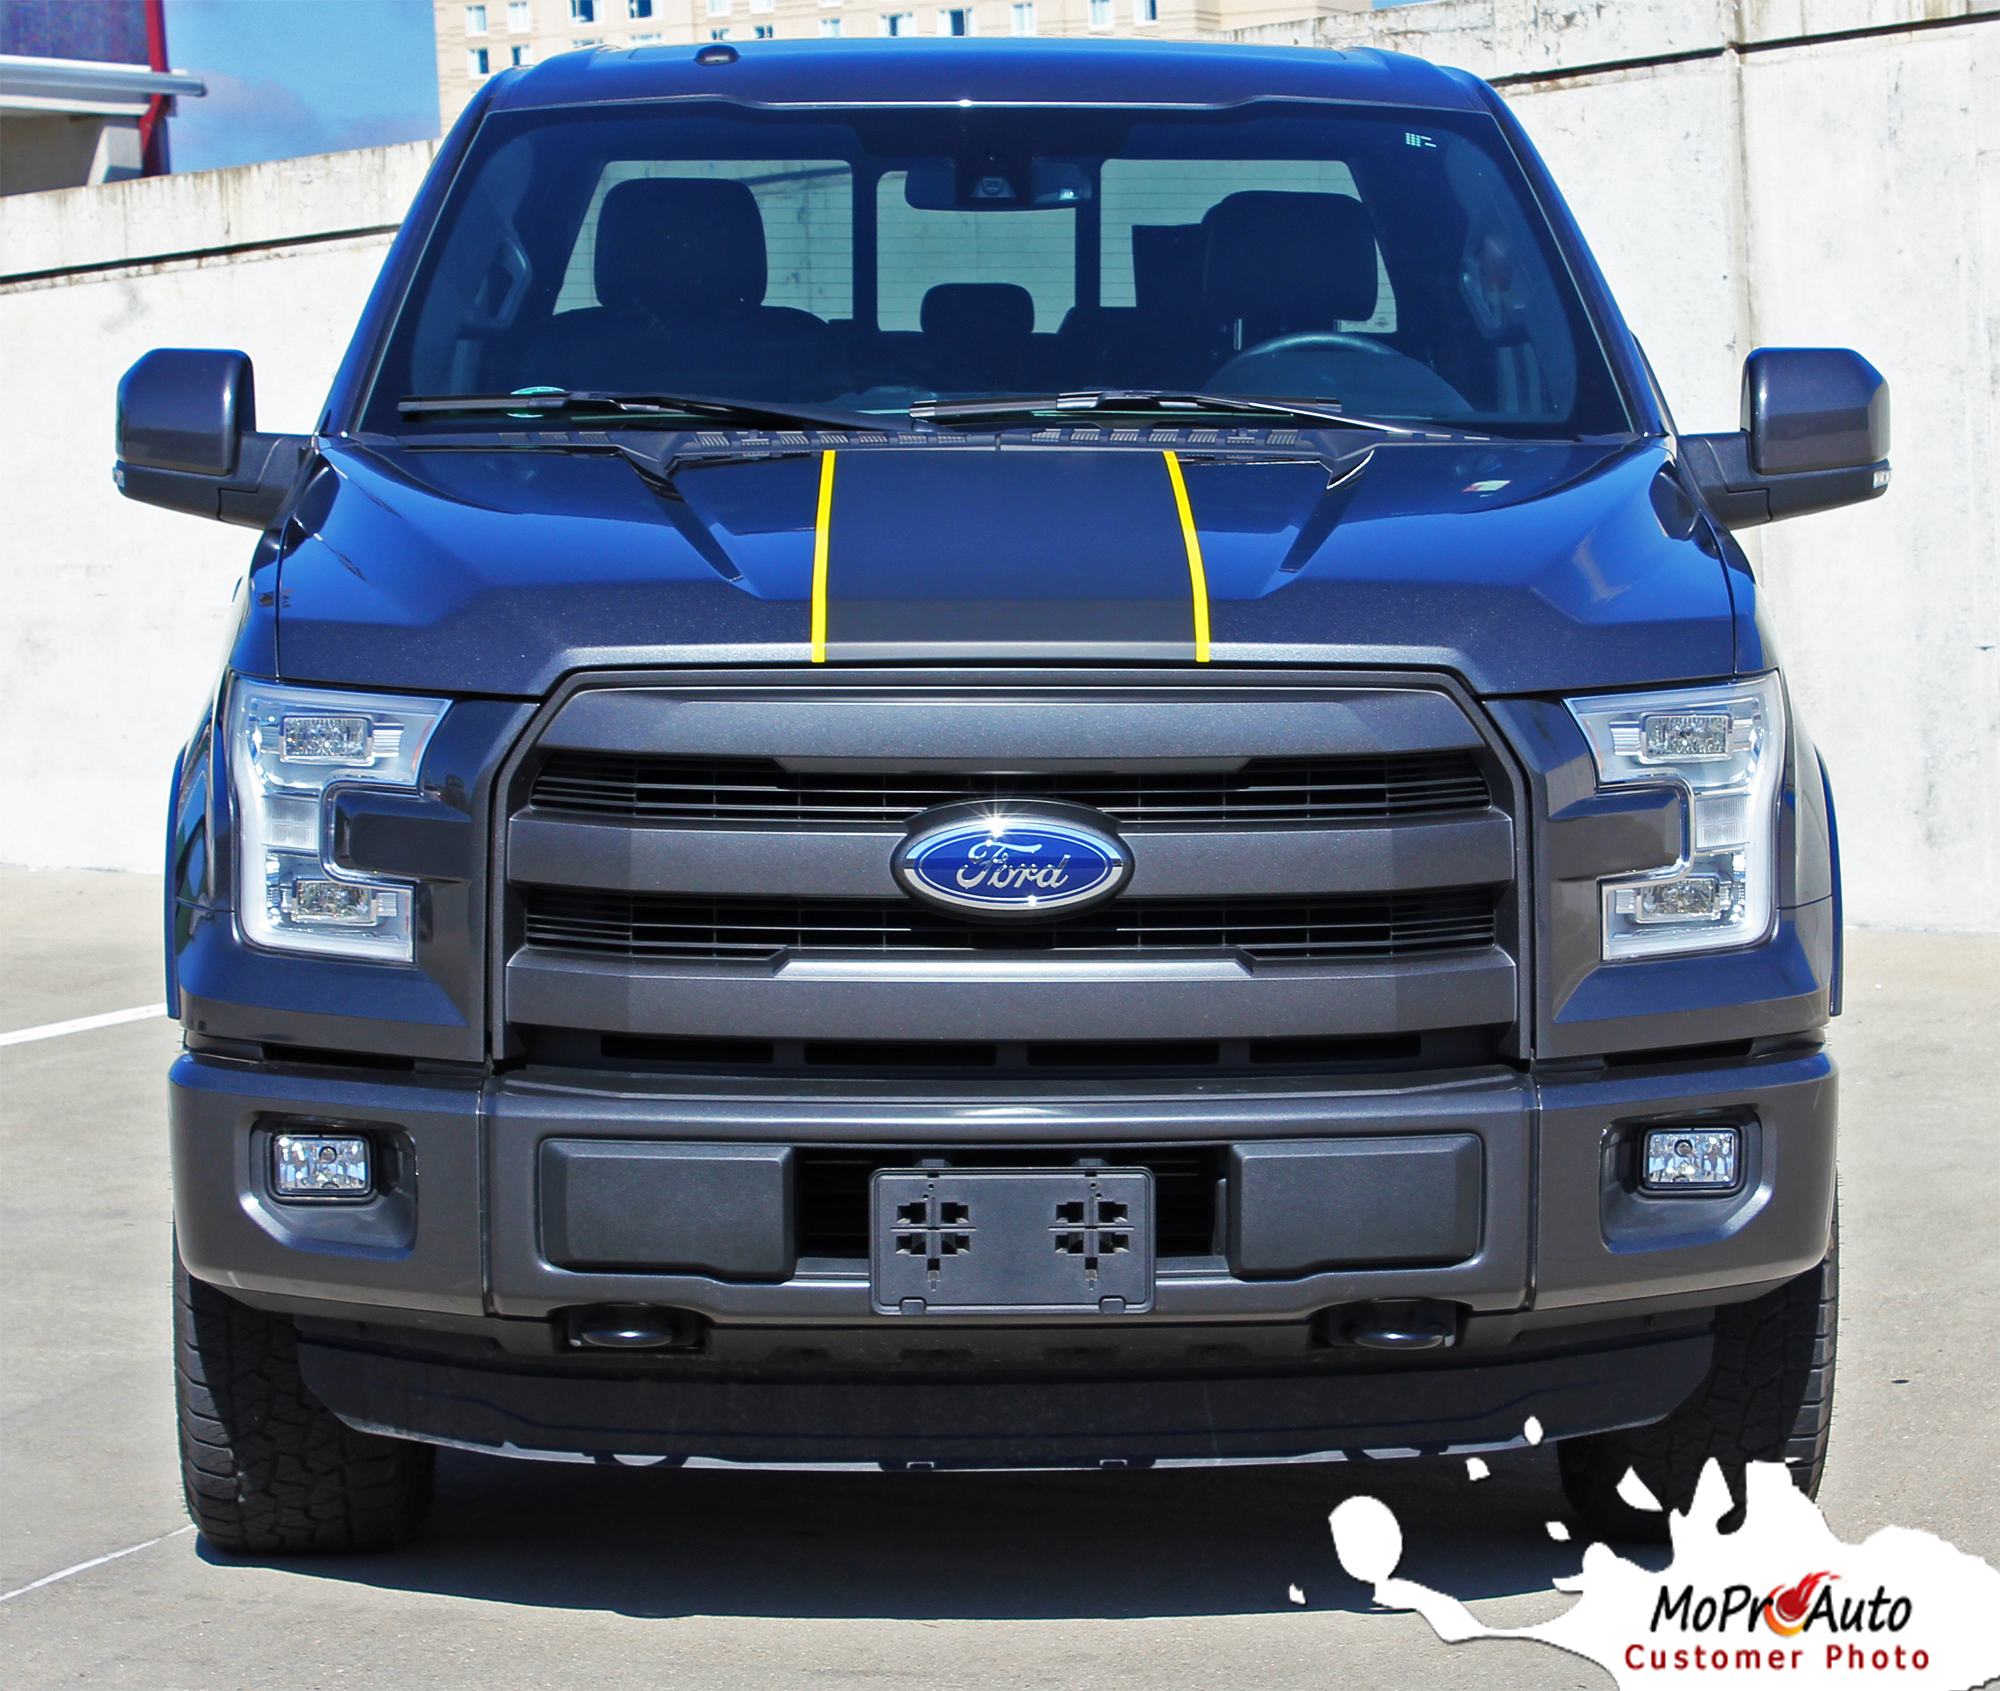 2015, 2016, 2017, 2018, 2019, 2020 Ford F-Series F-150 - MoProAuto Pro Design Series Vinyl Graphics and Decals Kit